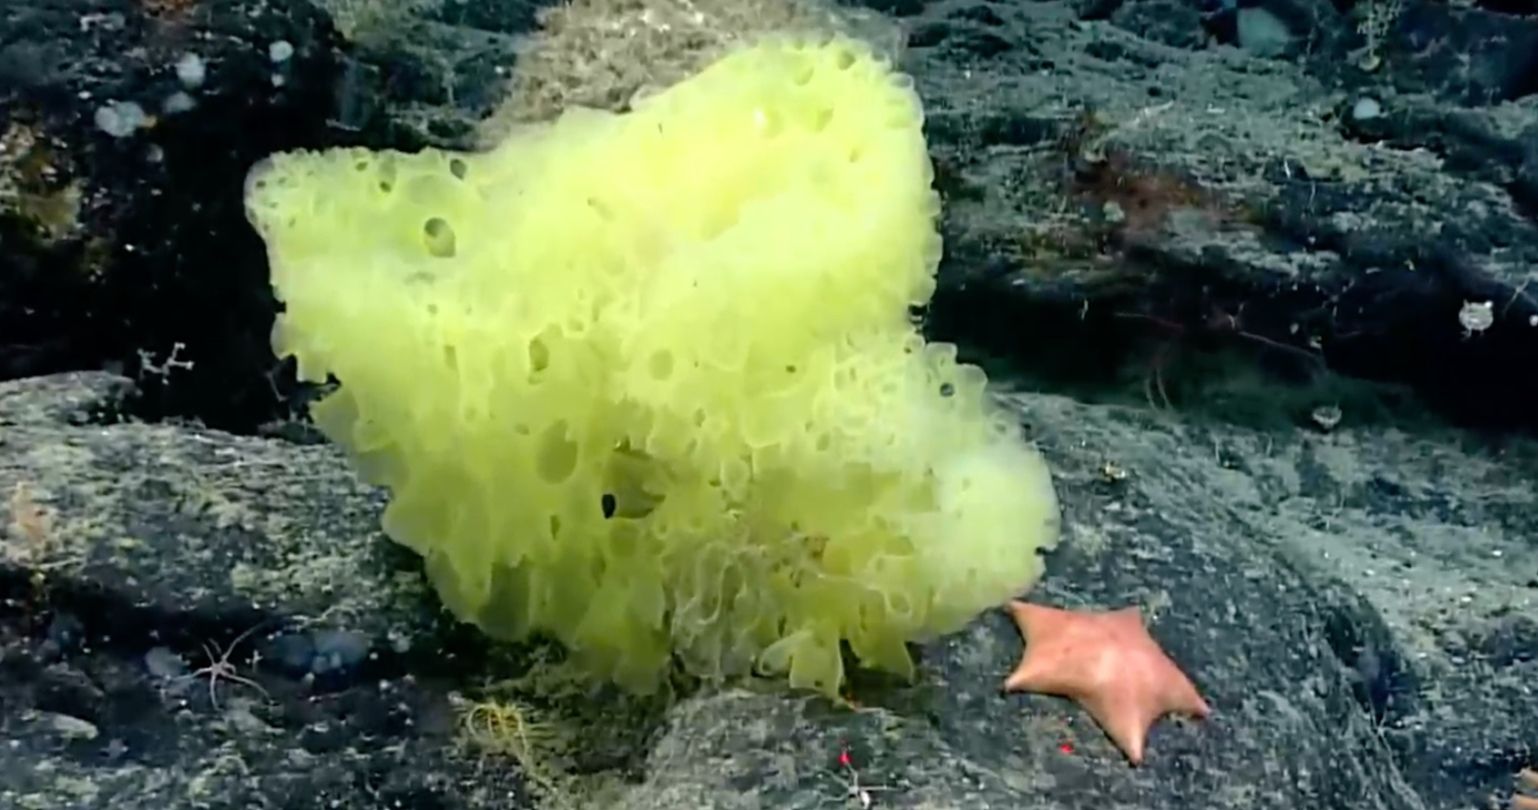 Real-Life SpongeBob and Patrick Spotted Together Deep in the Atlantic Ocean